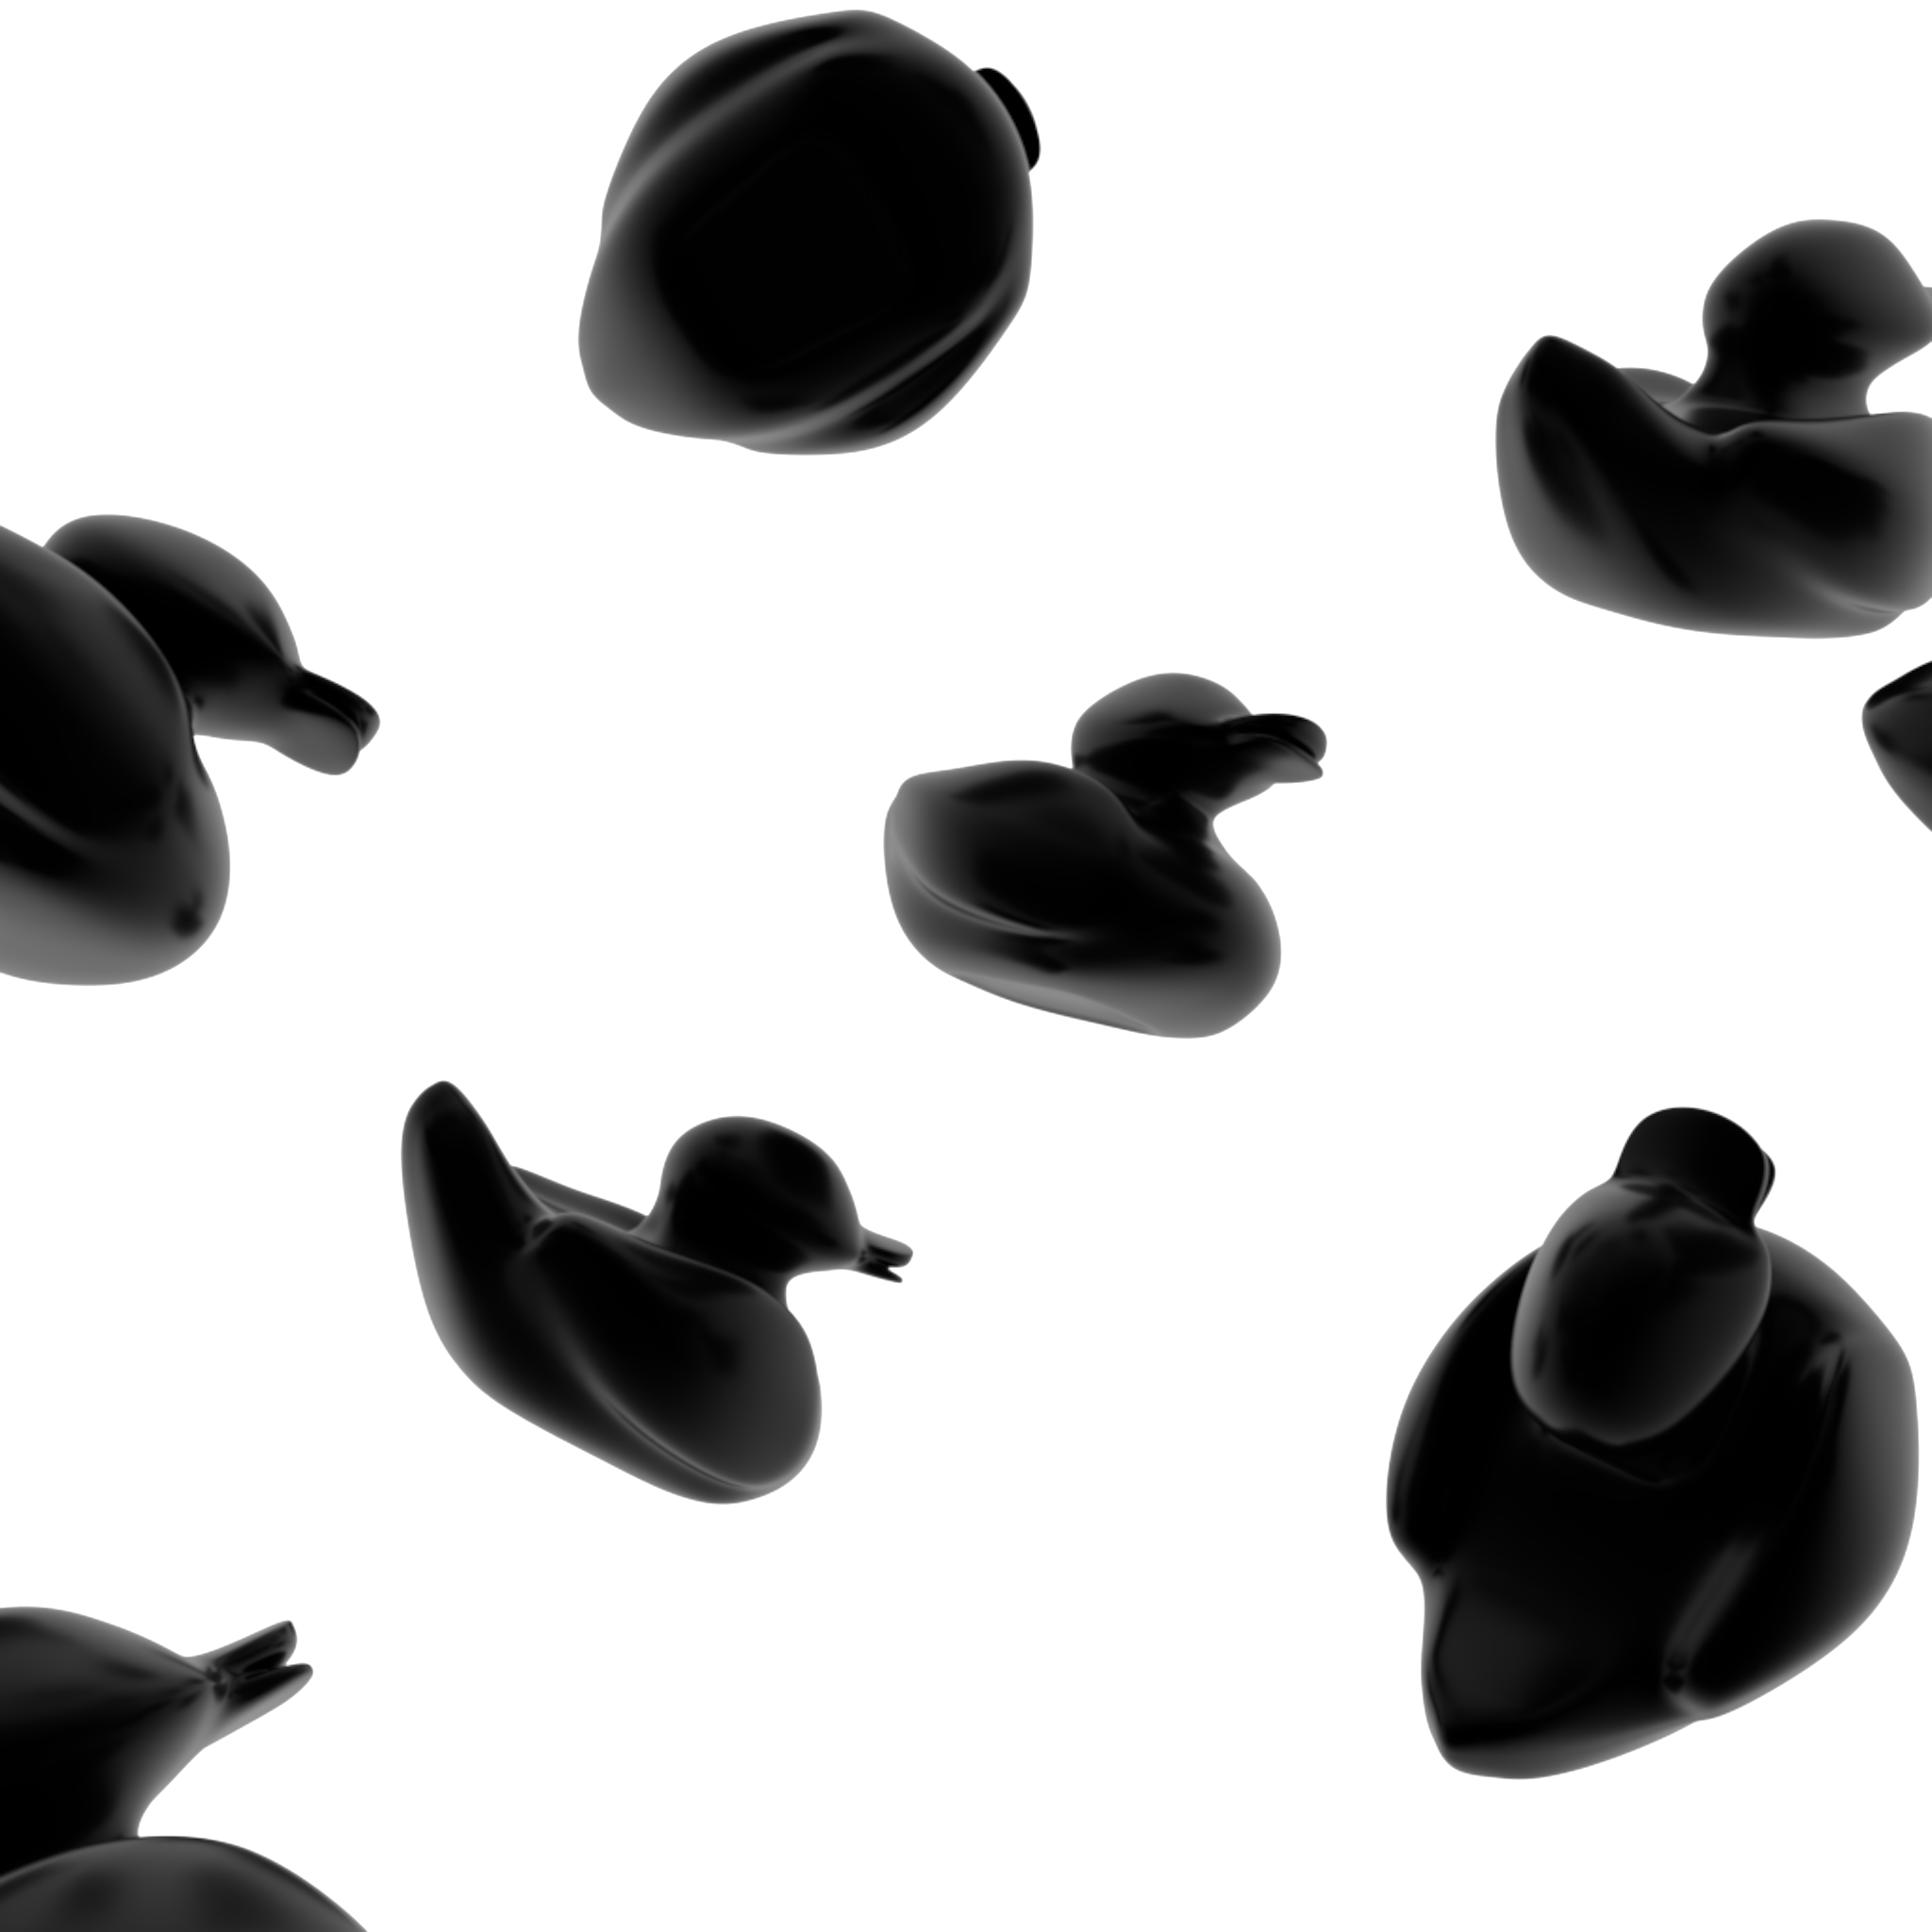 Rubber ducky 3d render image.